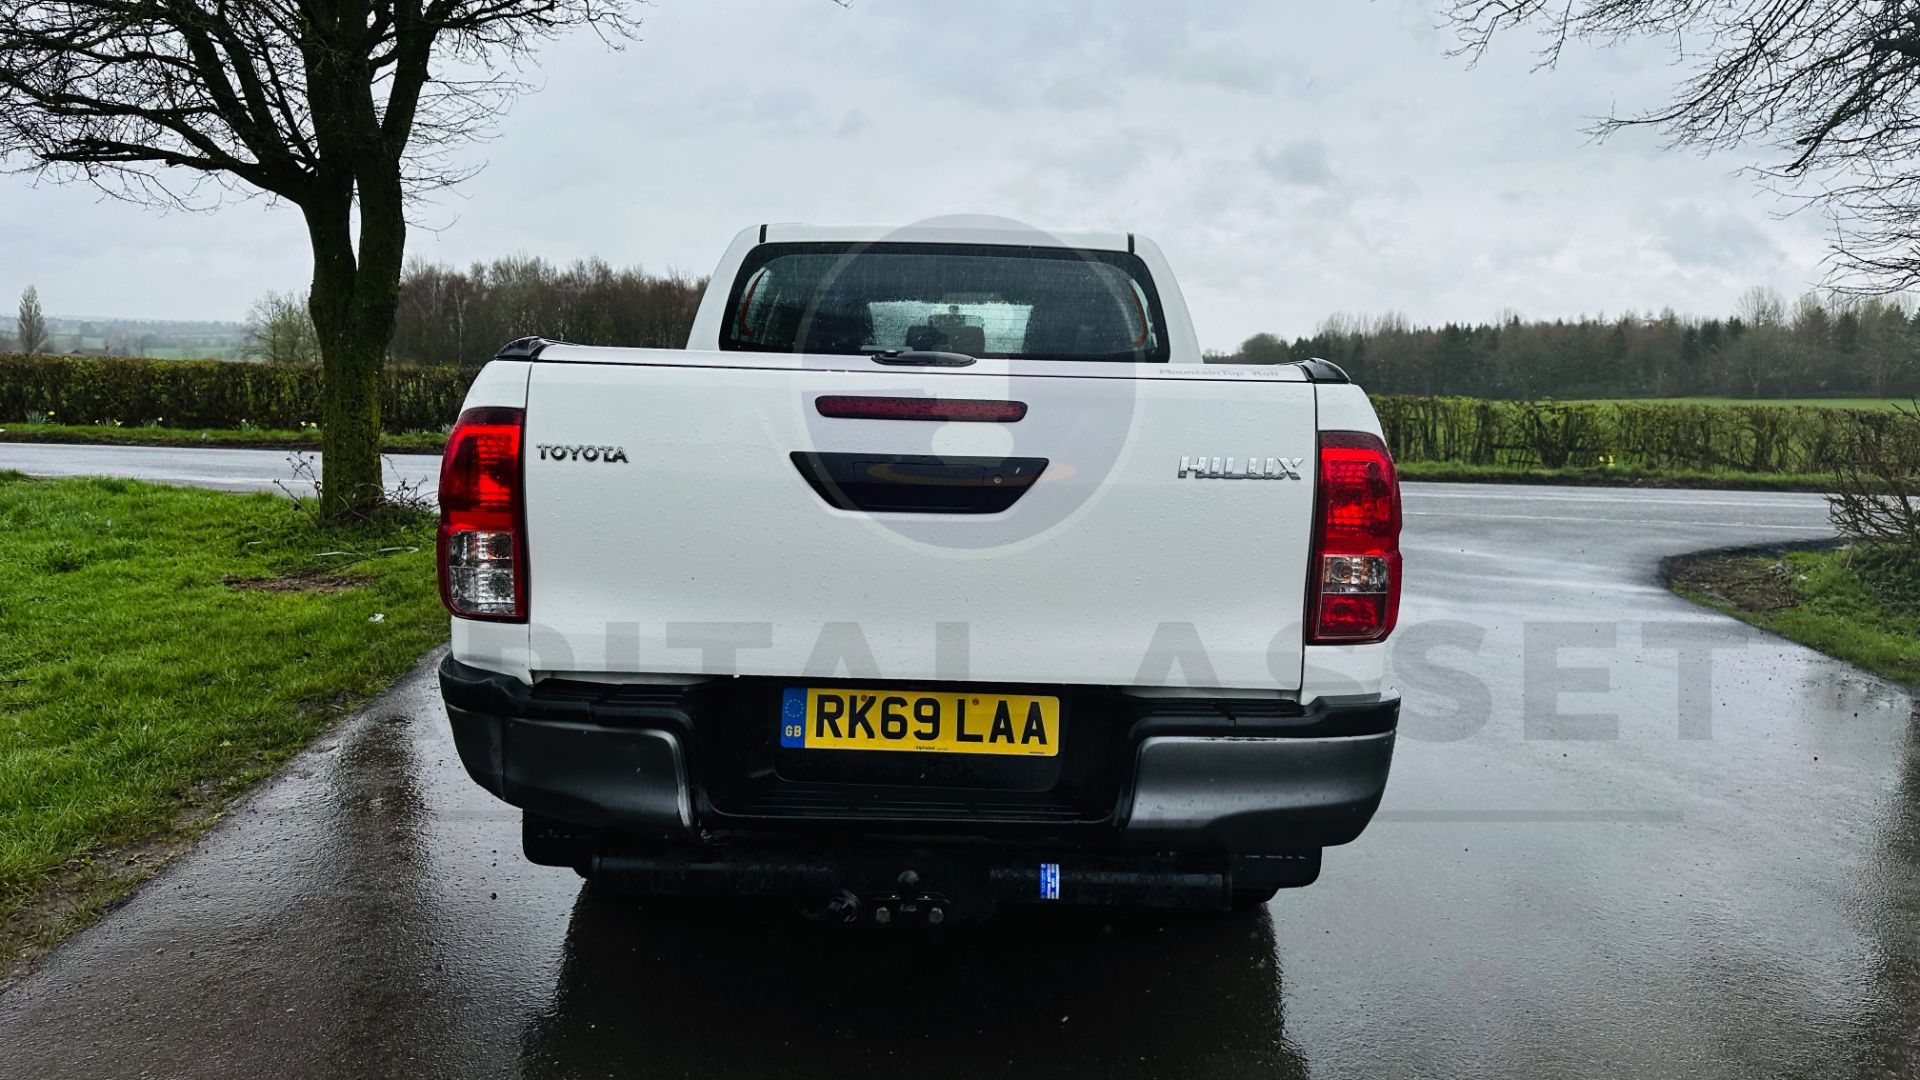 TOYOTA HILUX *DOUBLE CAB PICK-UP* (2020 - EURO 6) 2.4 D-4D - AUTO STOP/START *AIR CON* (1 OWNER) - Image 15 of 48